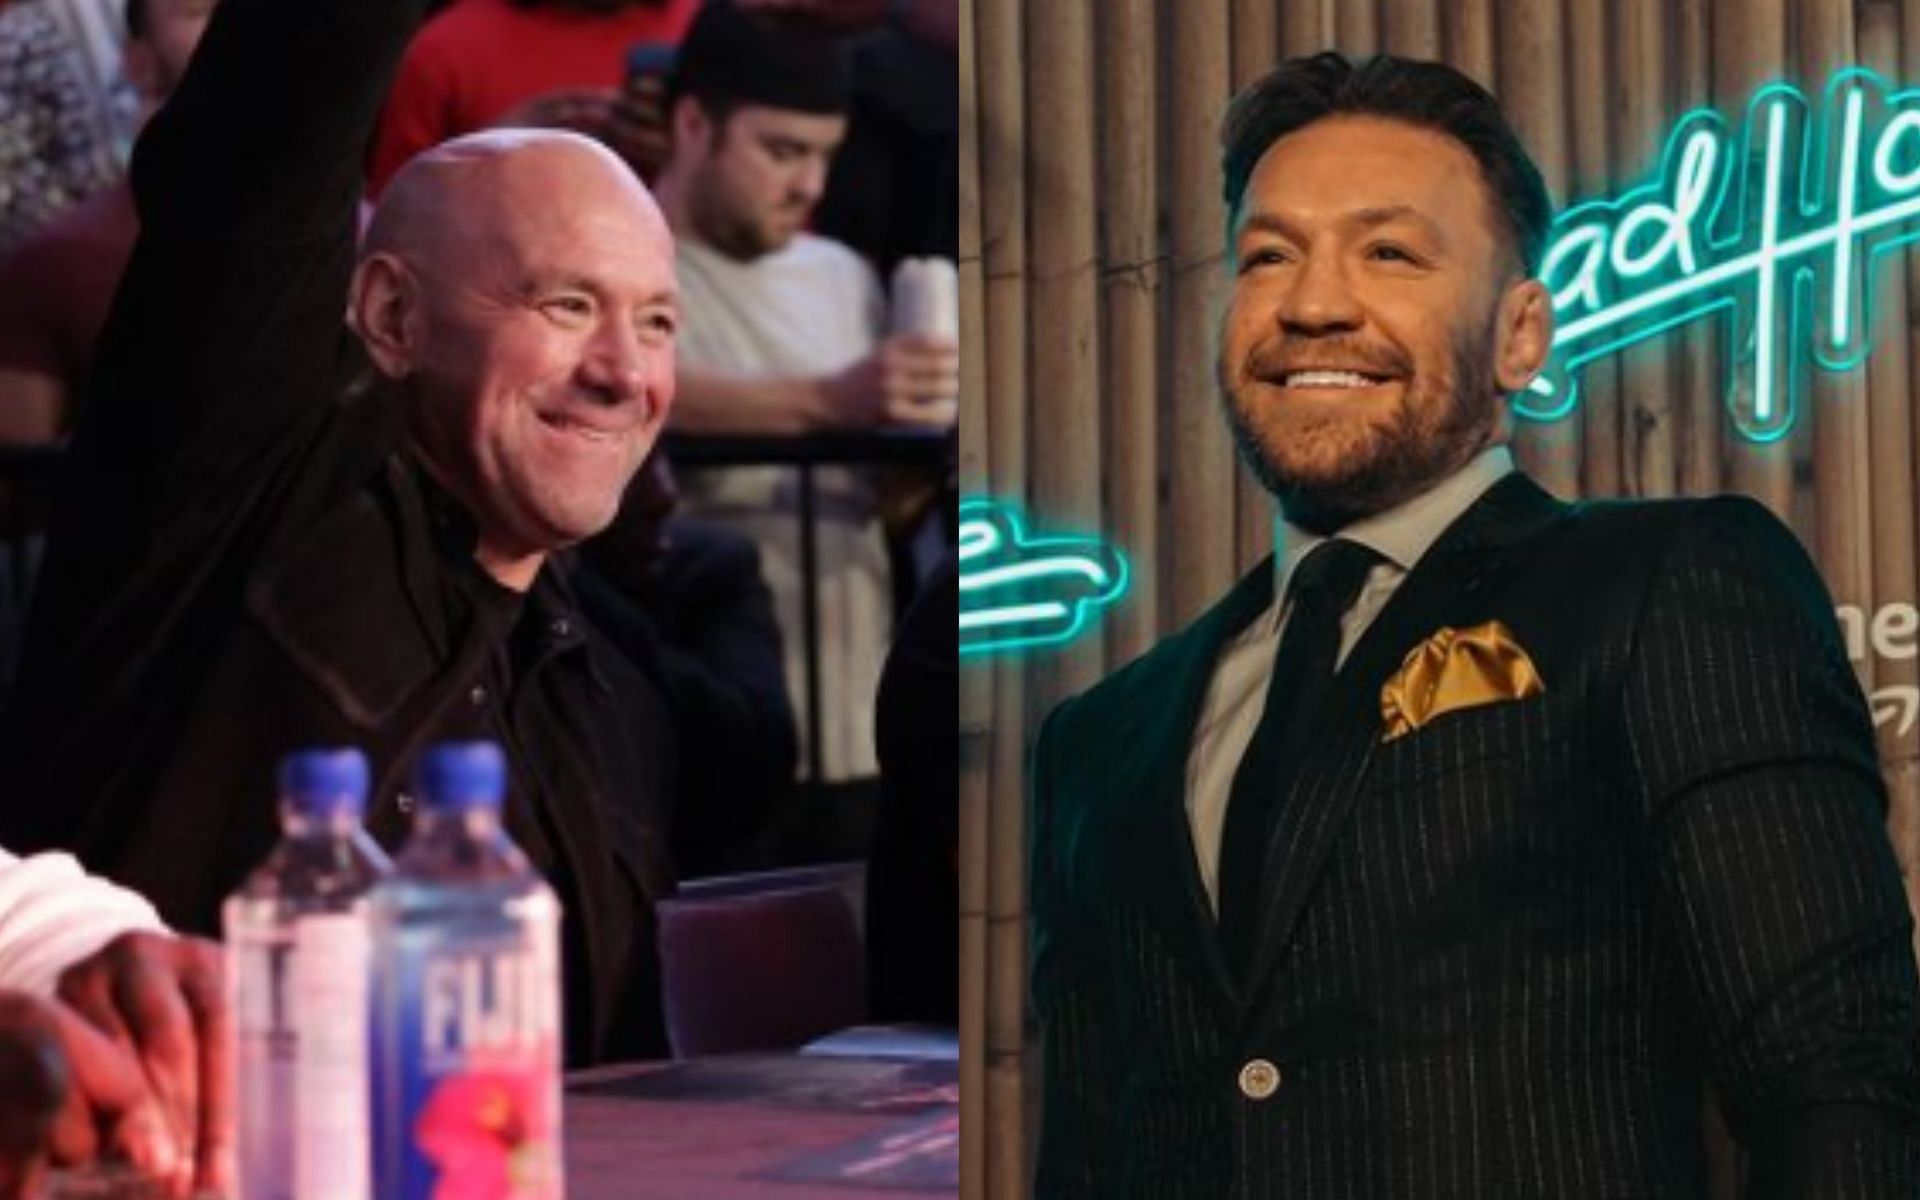 Dana White (L) wants everyone to know things with Conor McGregor (R) are all good. [Images via @DanaWhite and @Thenotoriousmma on Instagram]